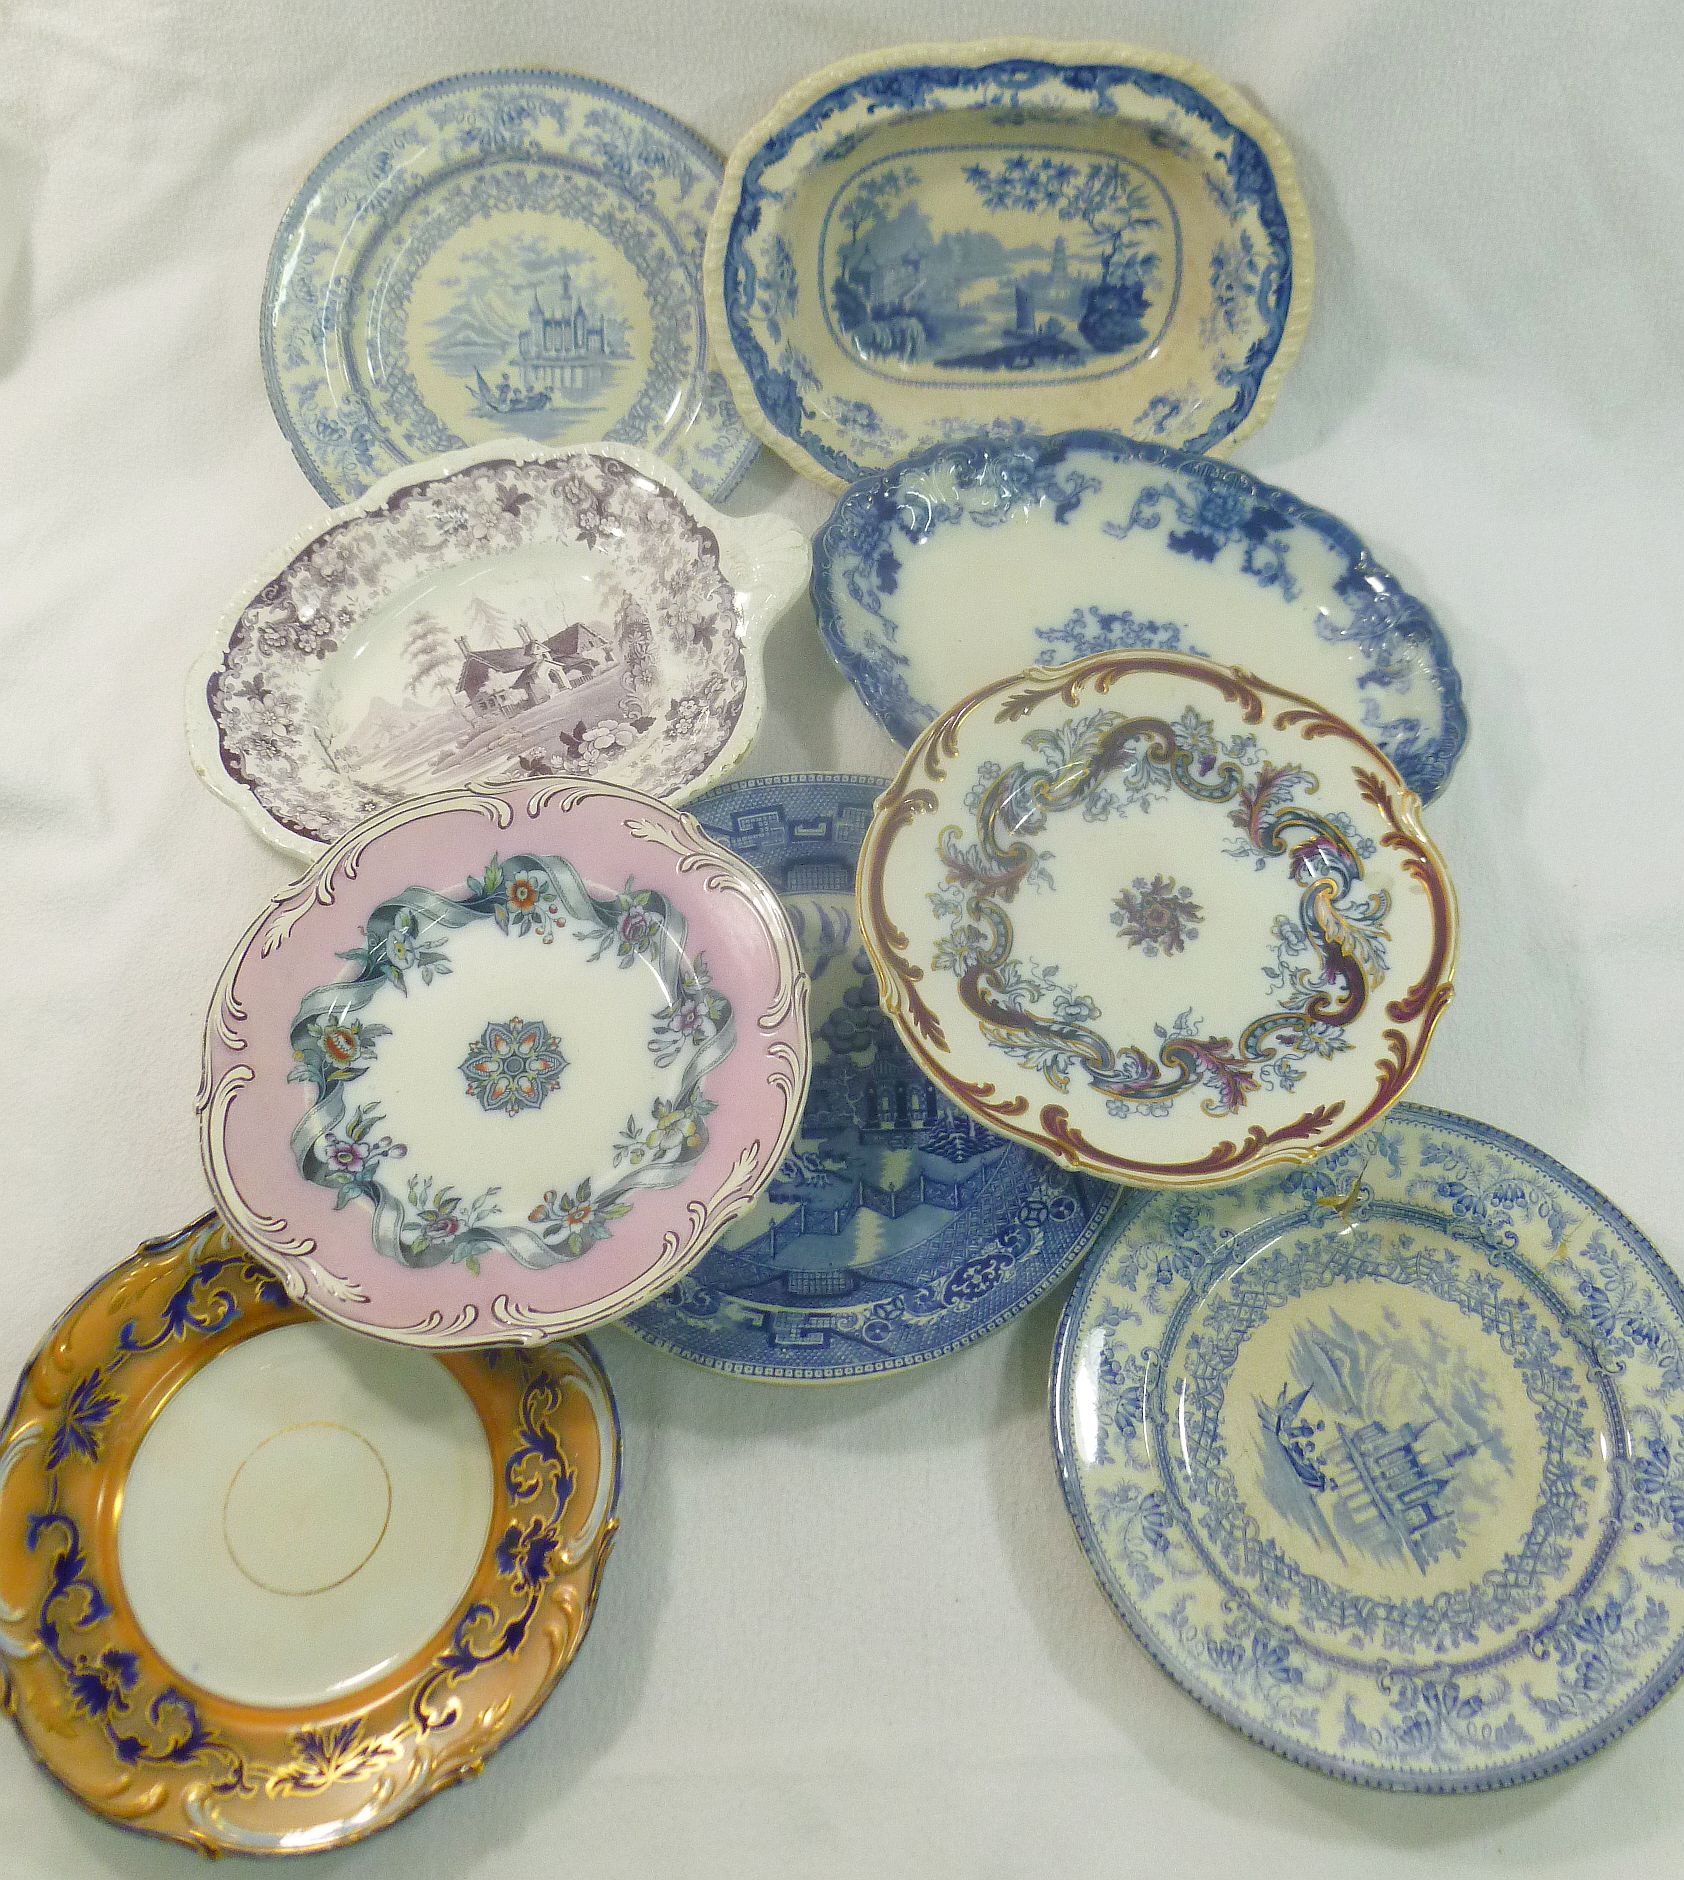 A collection of 19th century transfer decorated earthenware comprised of three plates by